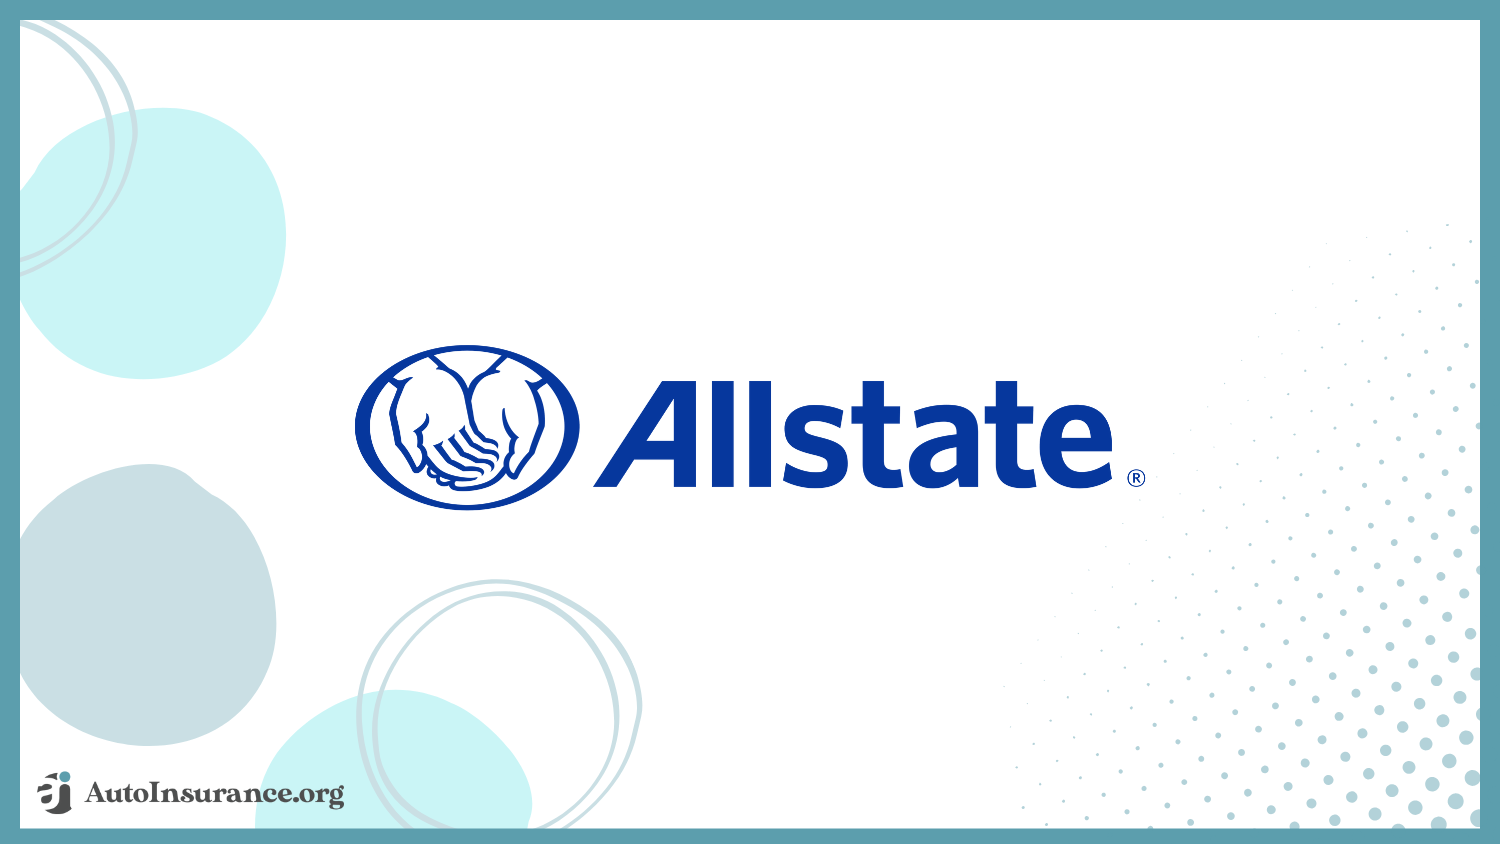 Allstate: Best Auto Insurance for Drivers with Epilepsy